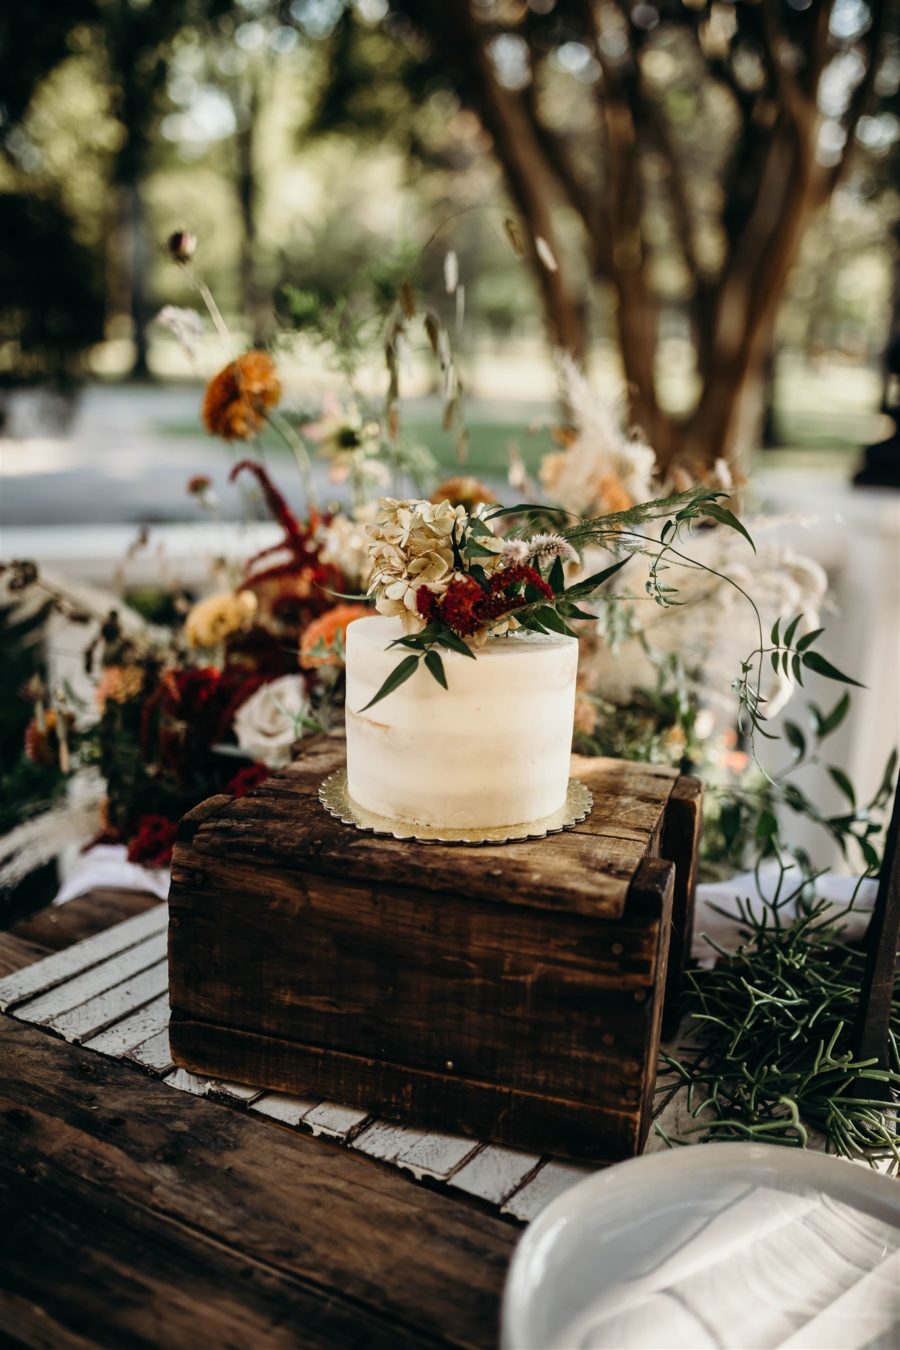 Simple Wedding Cake Design: Boho Winter Wedding Styled Shoot by Riley Gardner Photography featured on Nashville Bride Guide